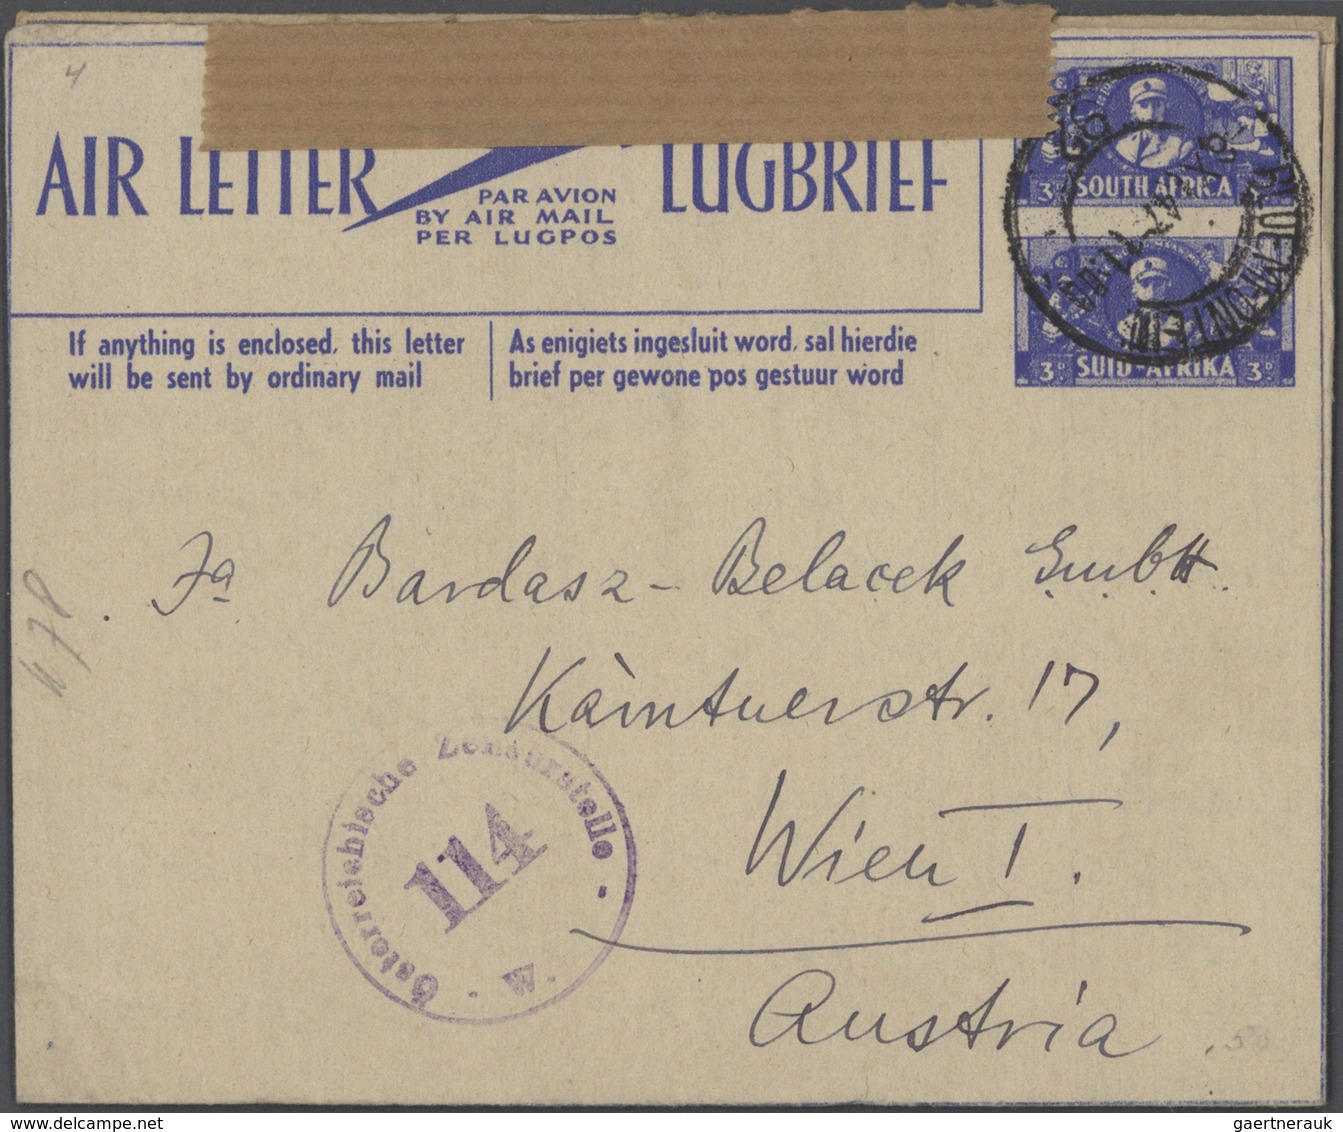 24131 Südafrika: 1945/80 (ca.), AEROGRAMMES: duplicated accumulation of about 280 airletters, lettercards